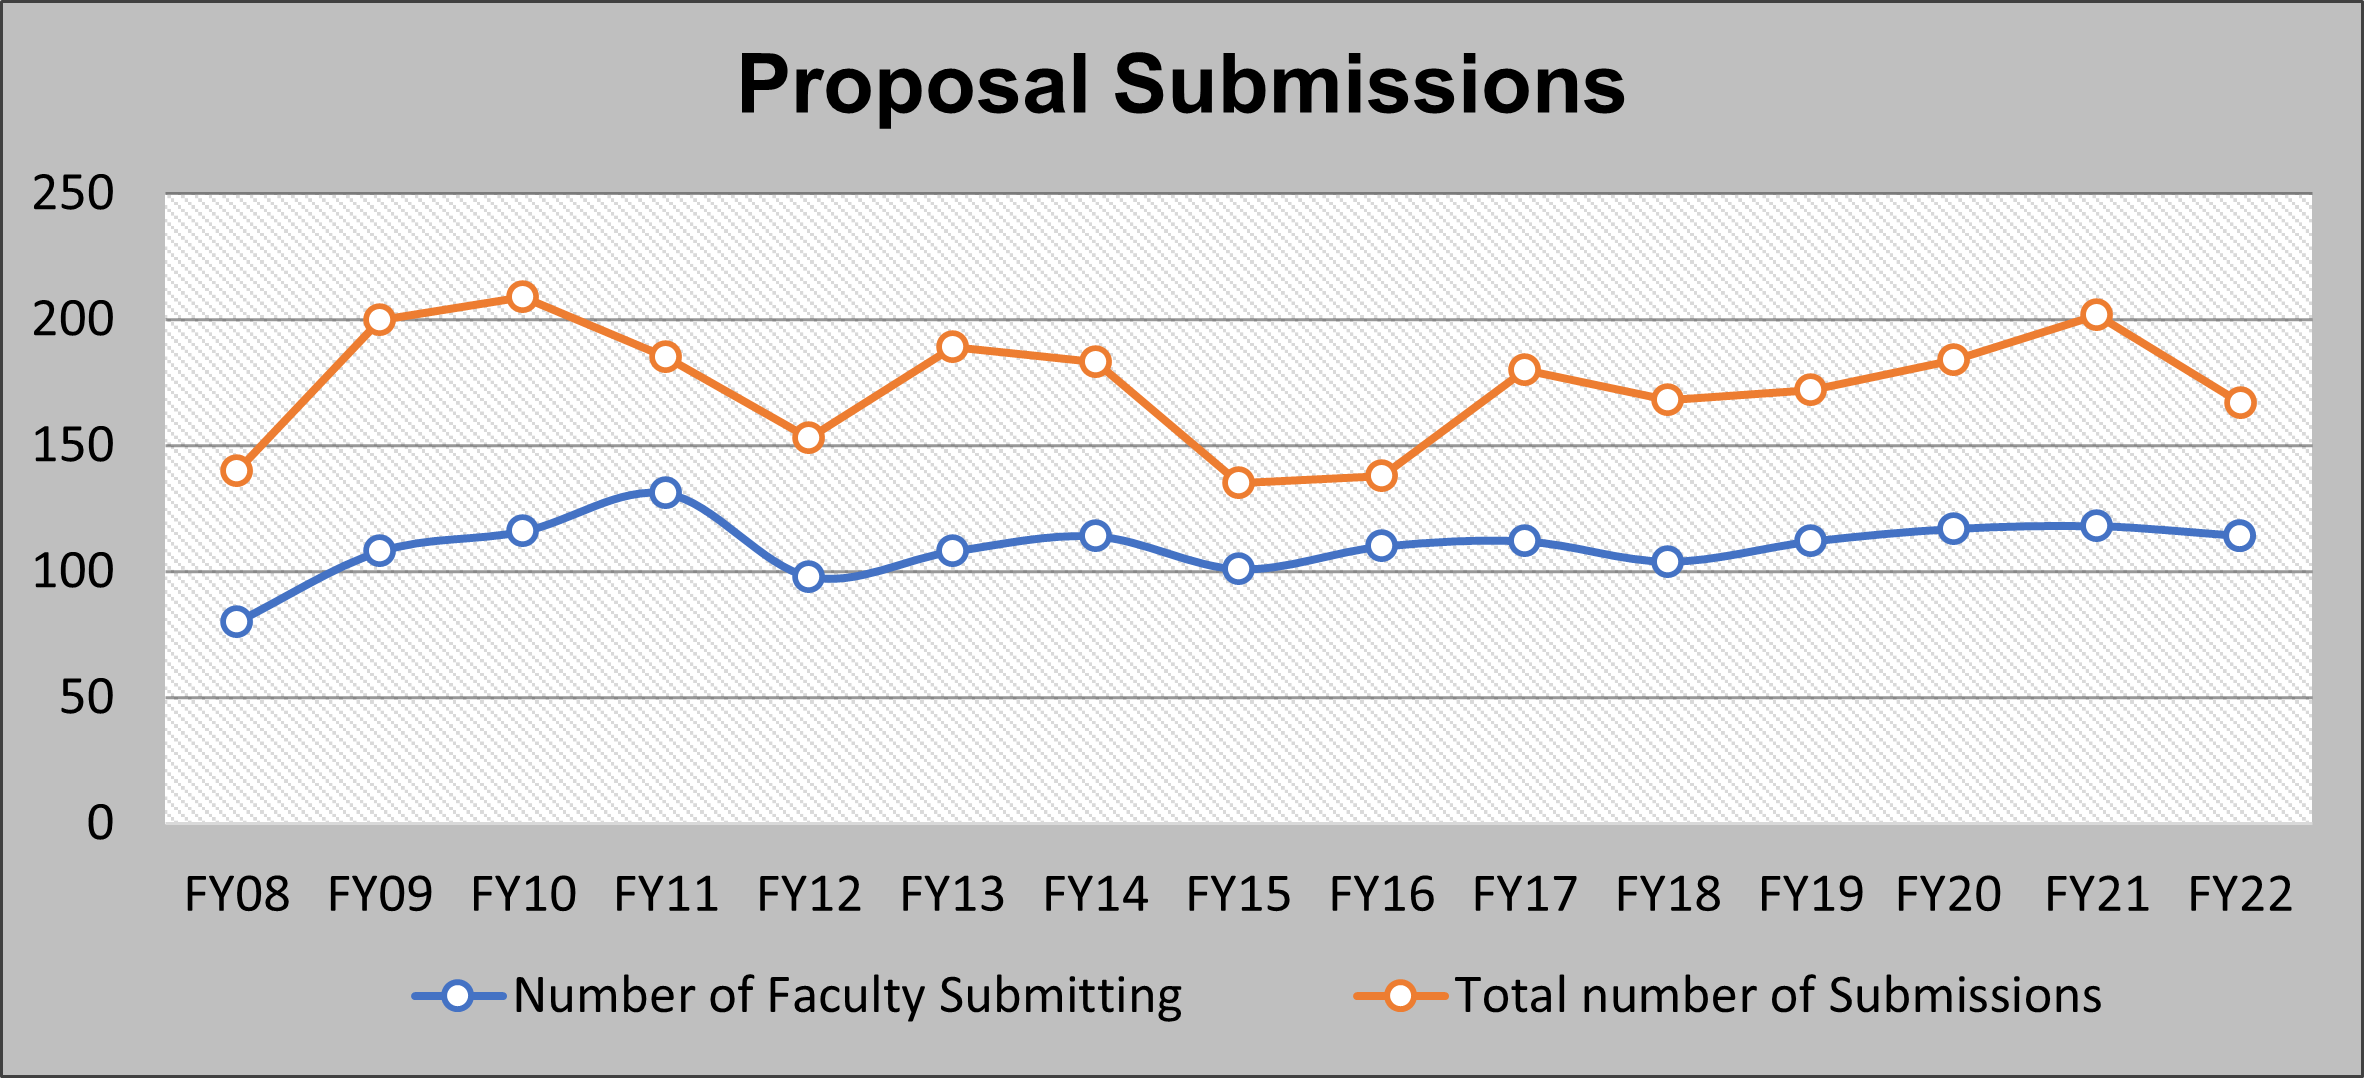 Chart of total proposal submissions from FY08 to FY22